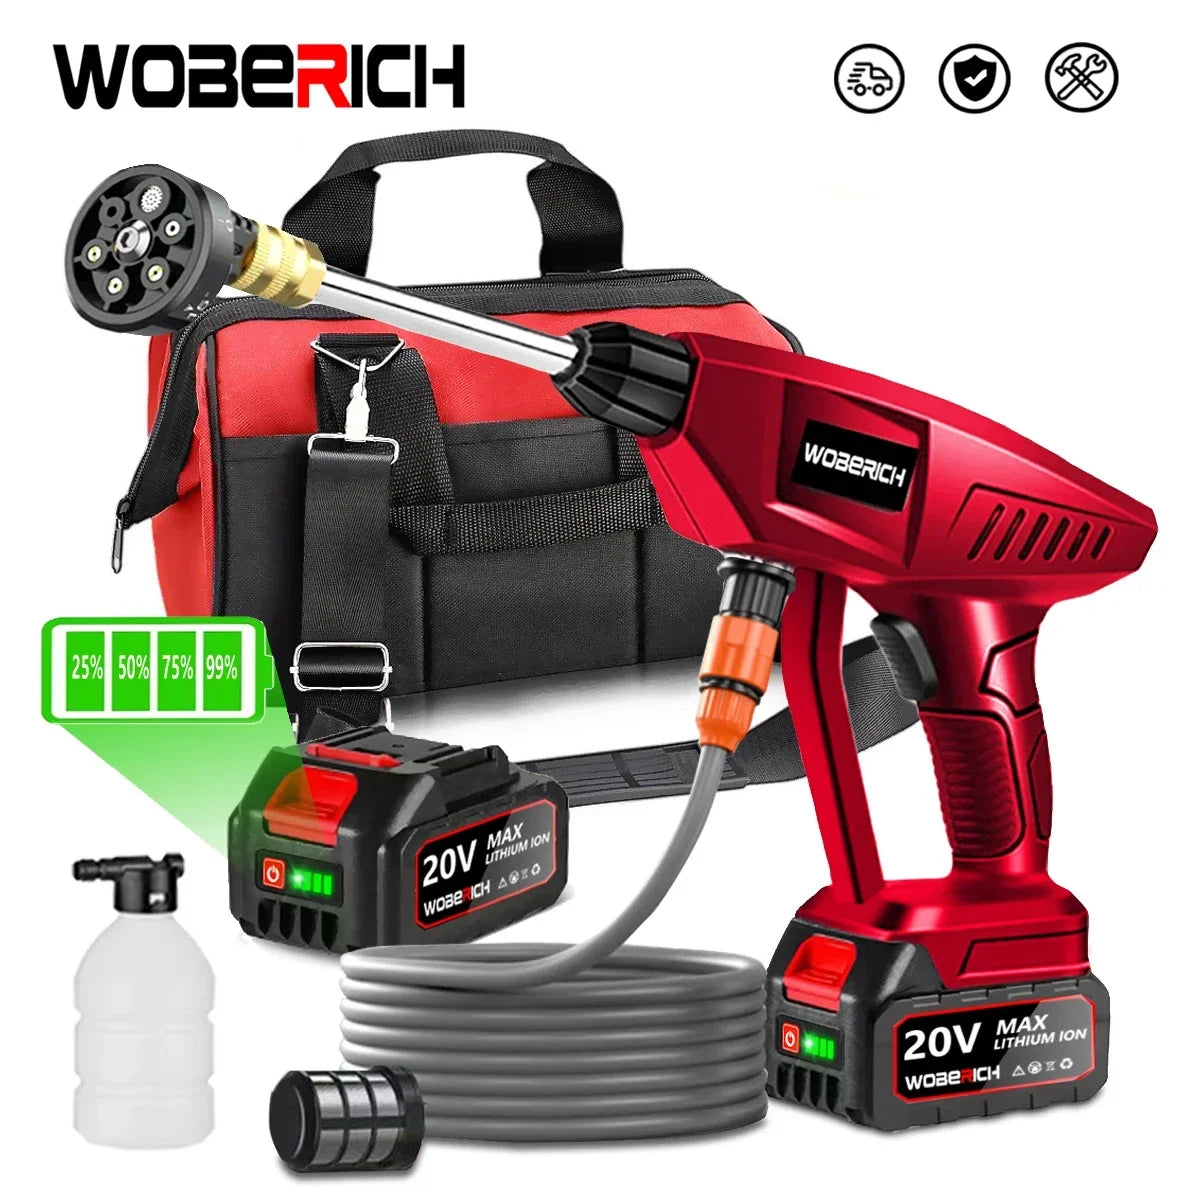 WOBERICH Cordless High Pressure Cleaner Washer Spray Water Gun Car Wash Pressure Water Cleaning Machine for Makita 18V Battery